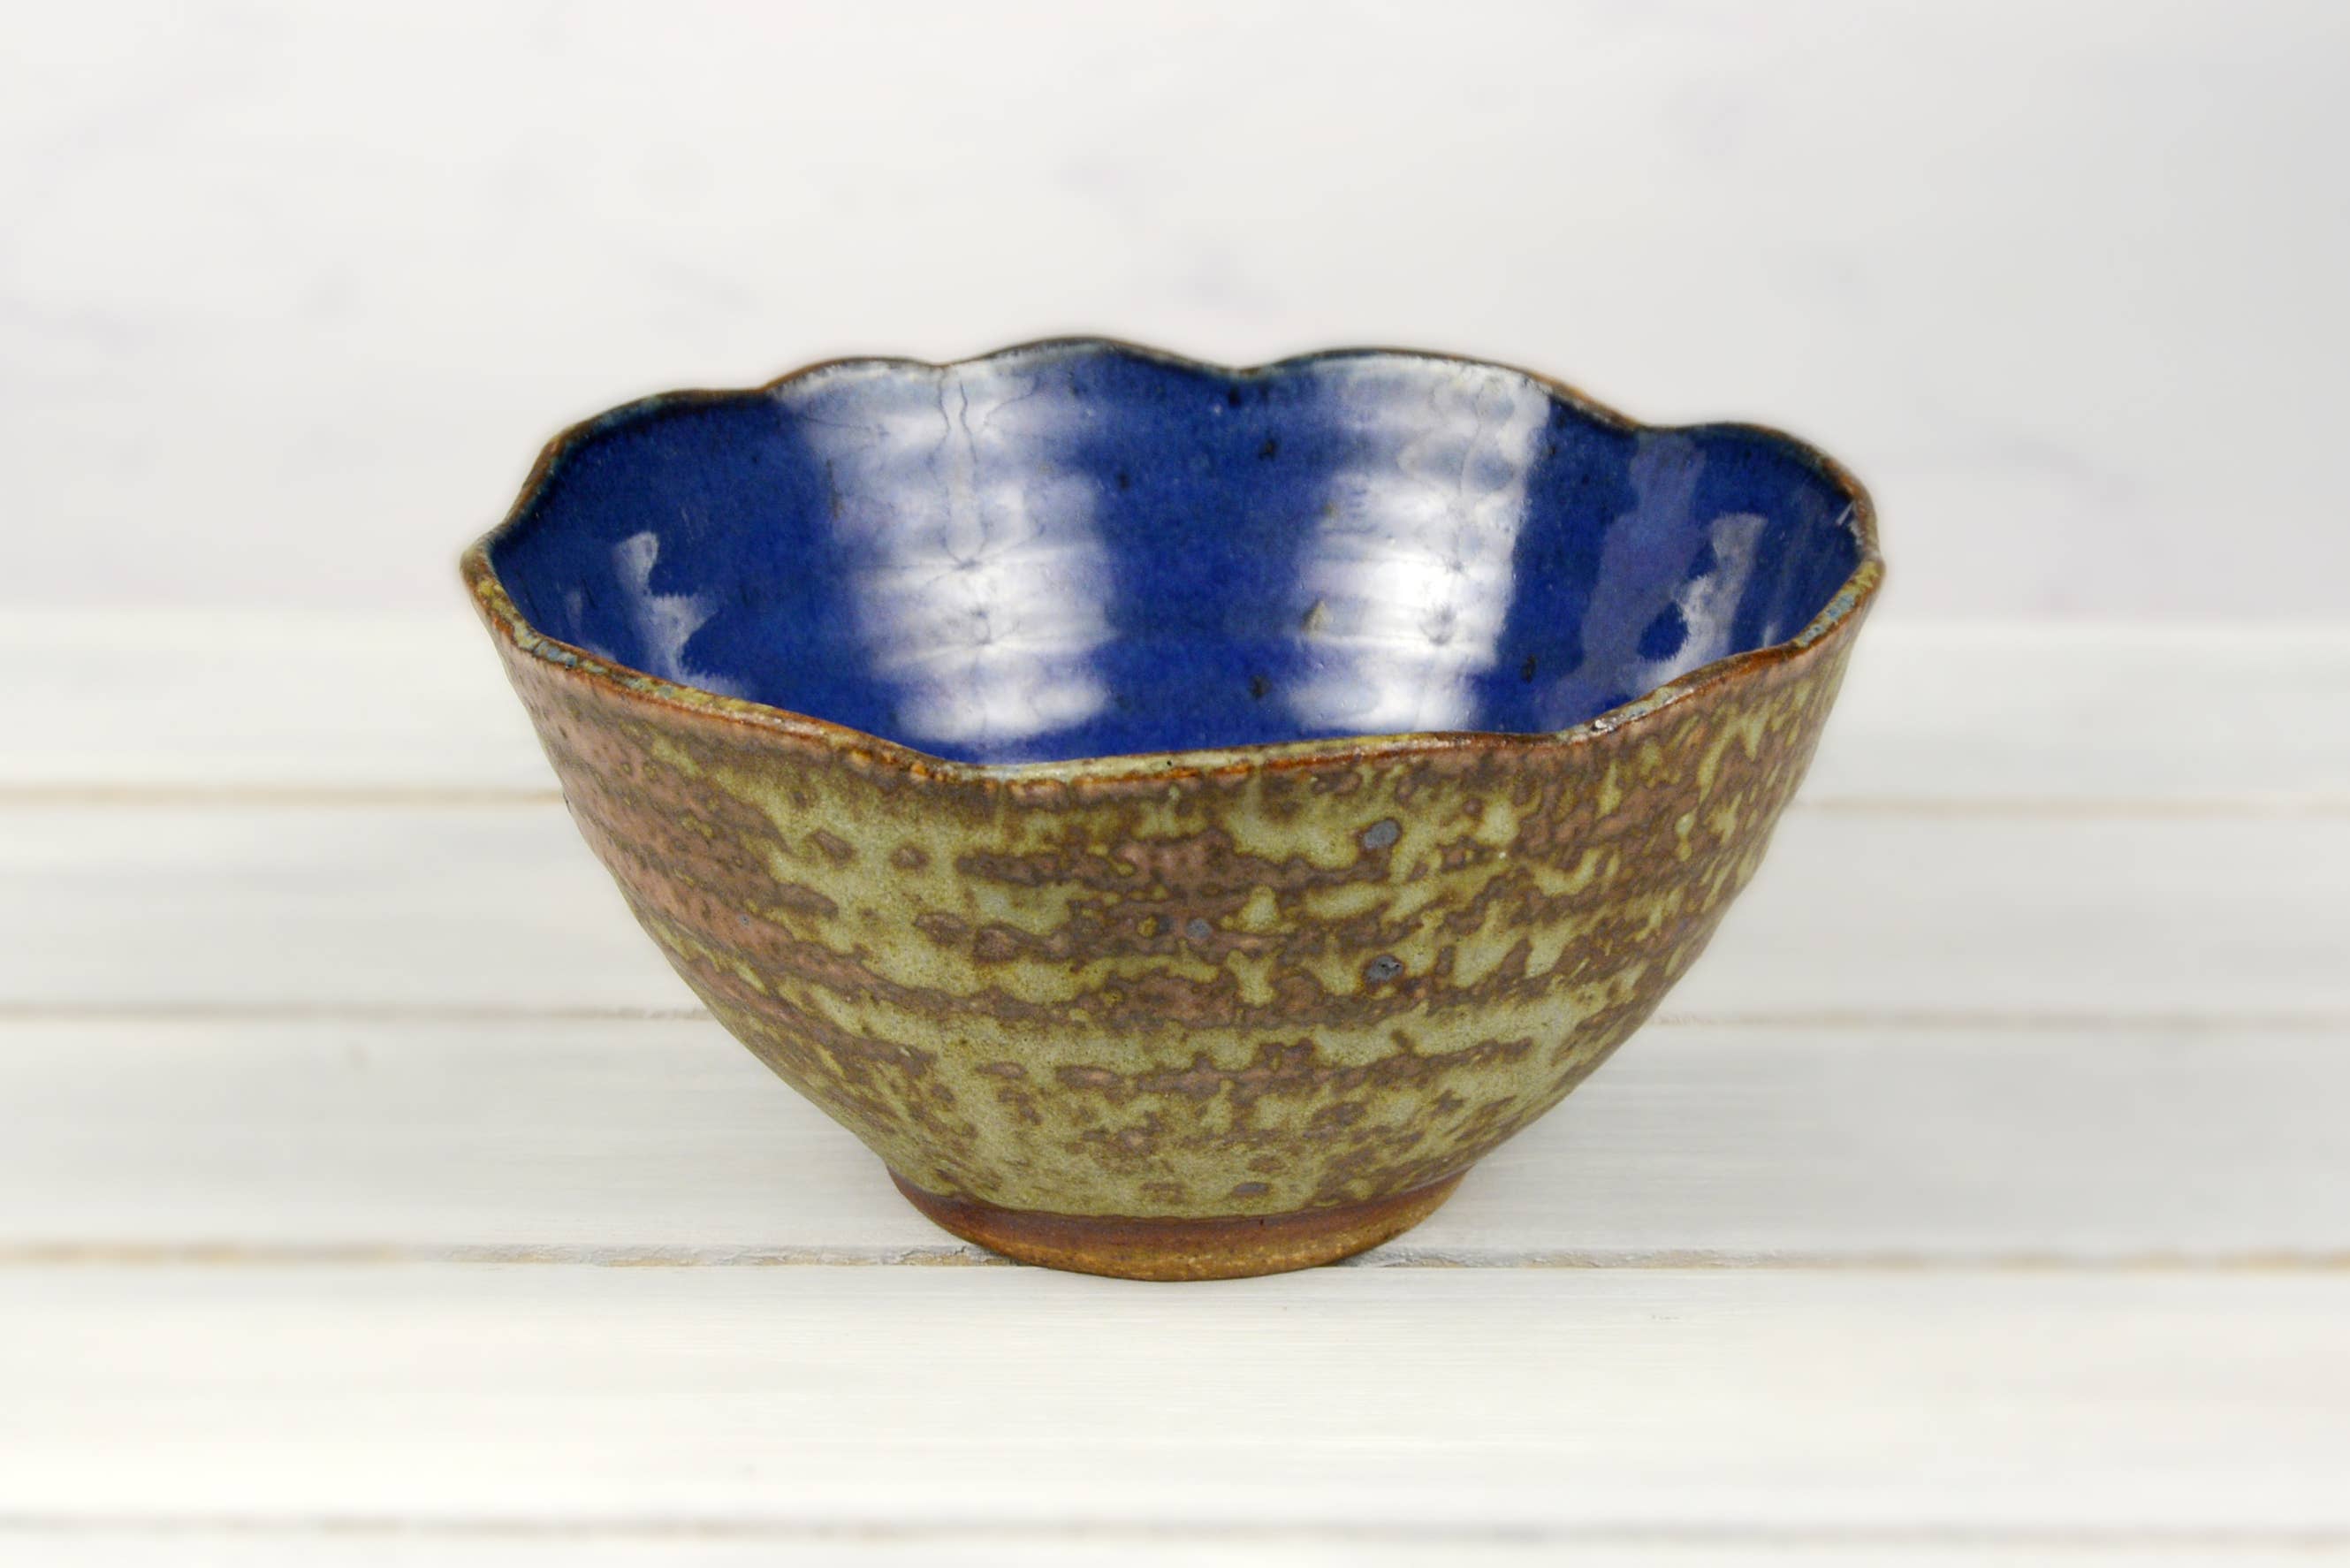 Wavy Edged Bowl - no glass - 5 sizes available